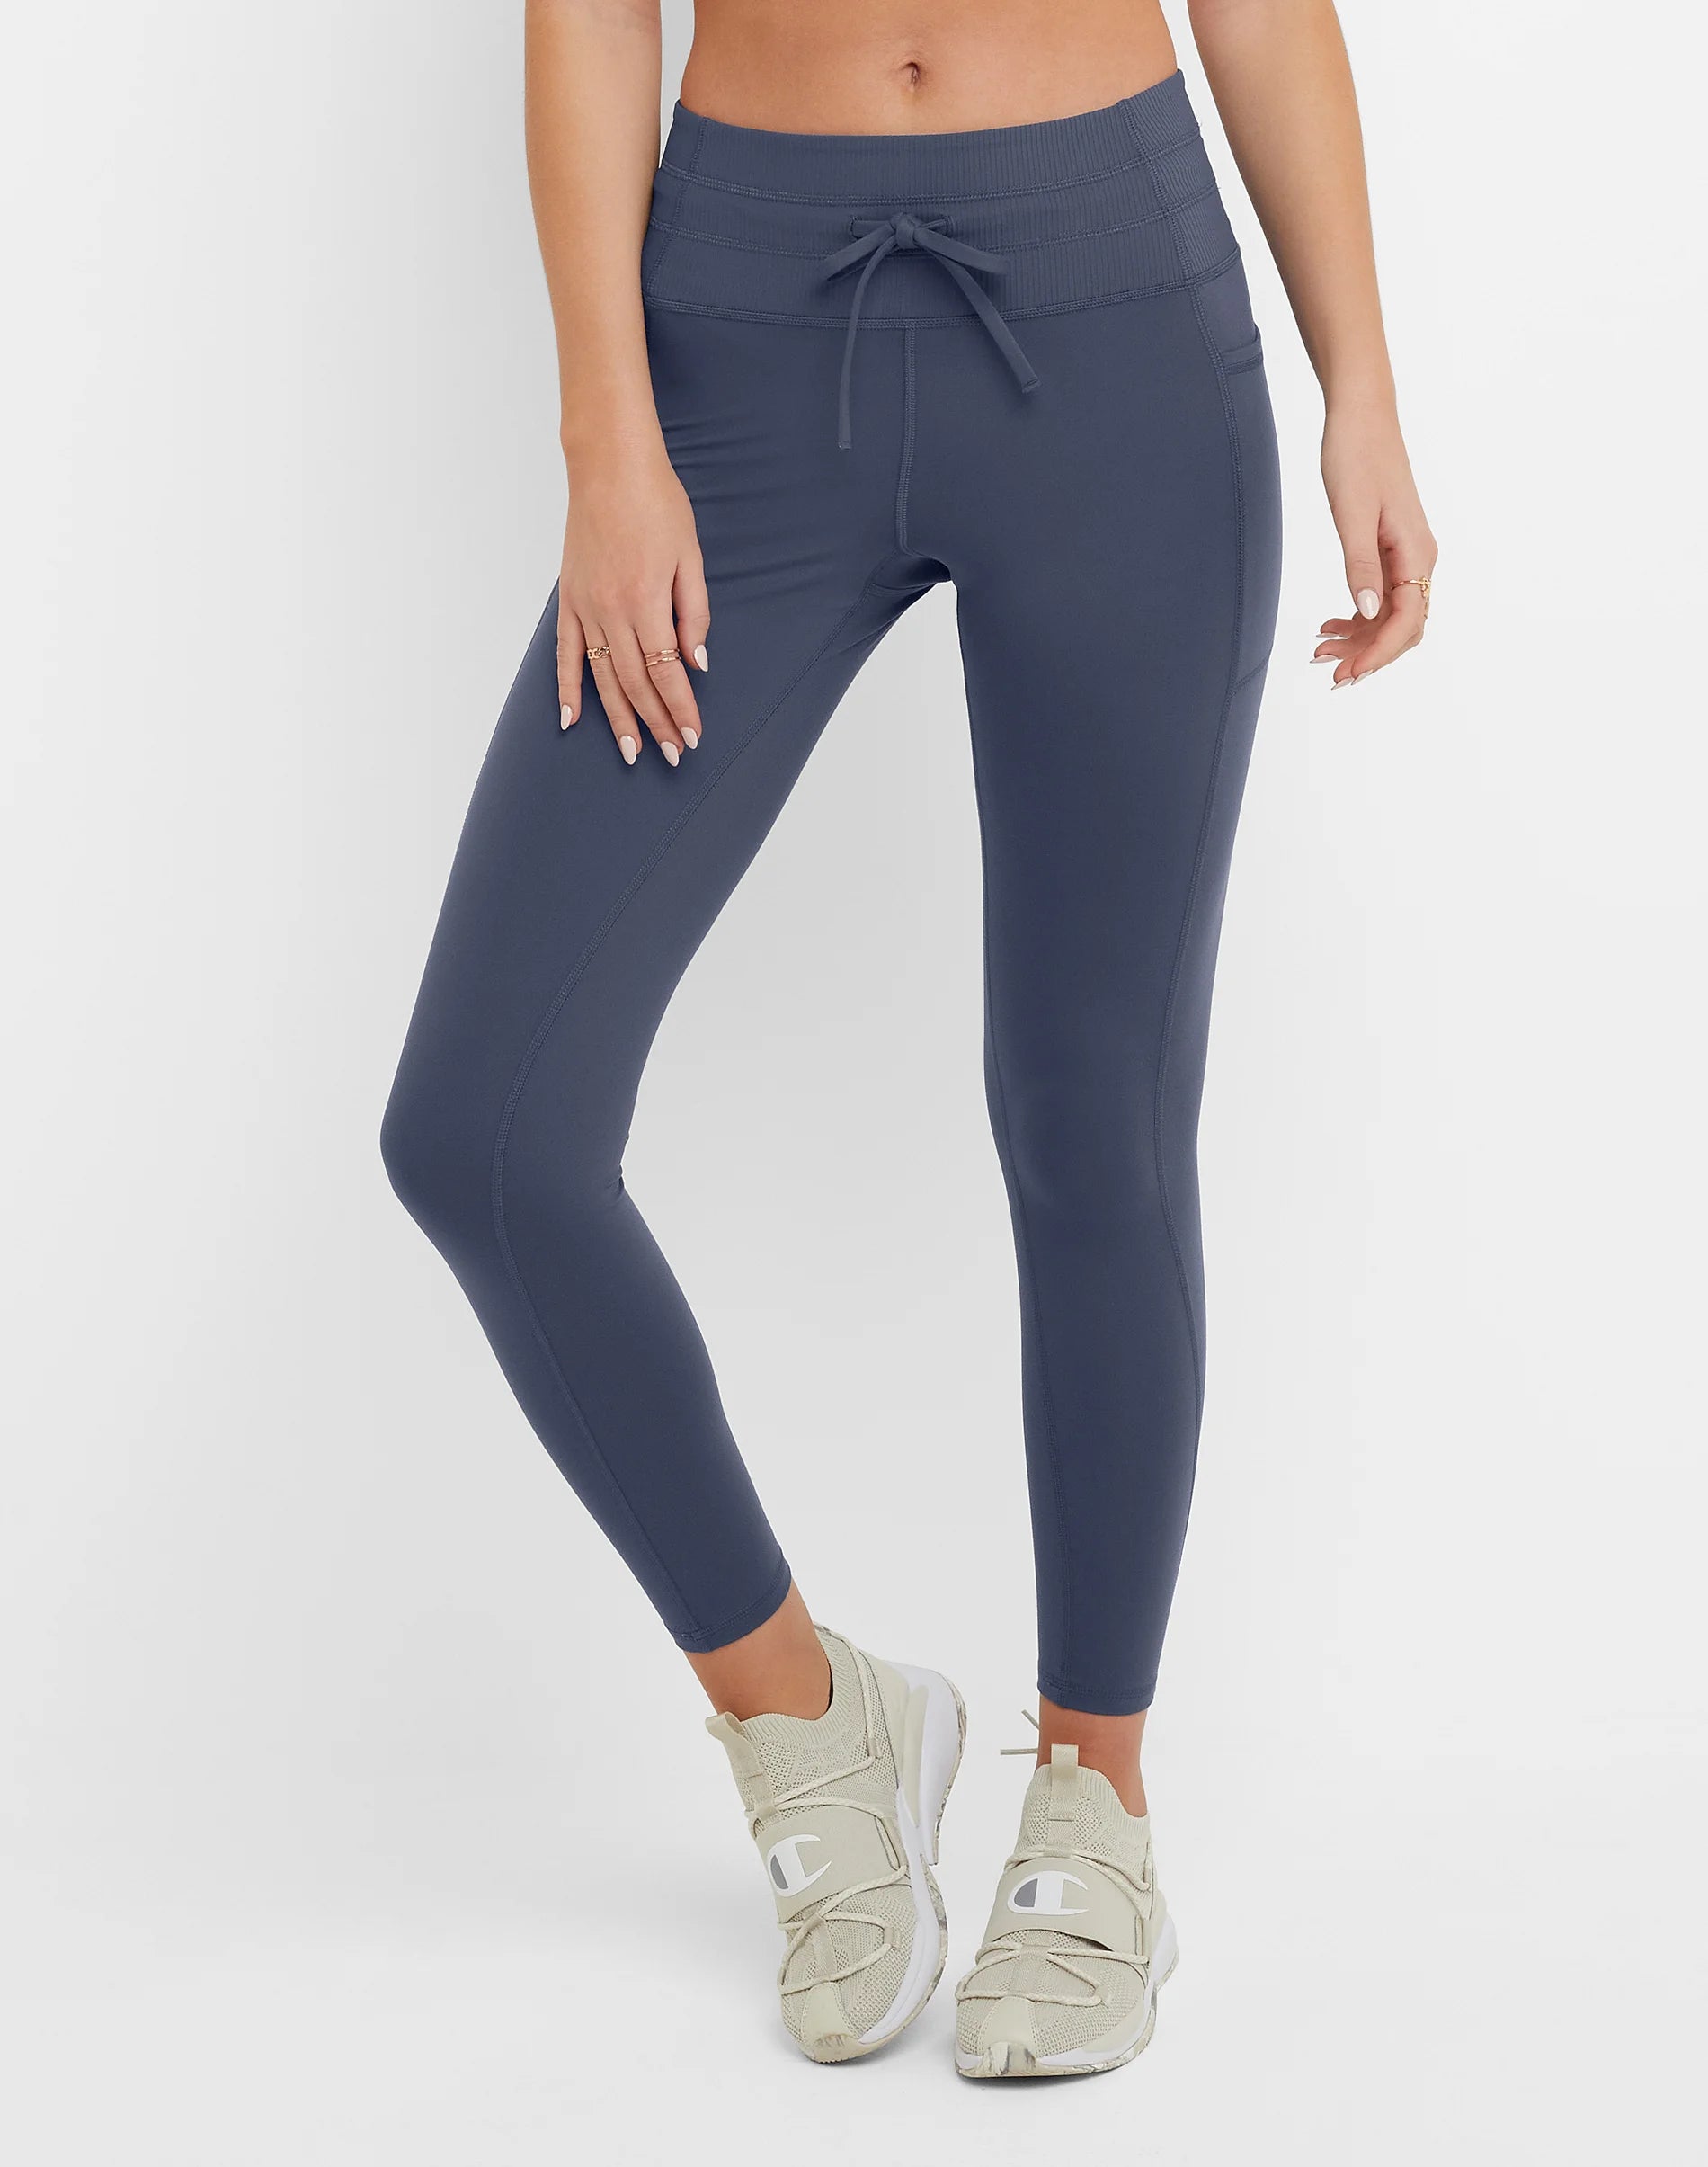 Champion, Soft Touch, Double-Lined Period Leggings for Women, 25